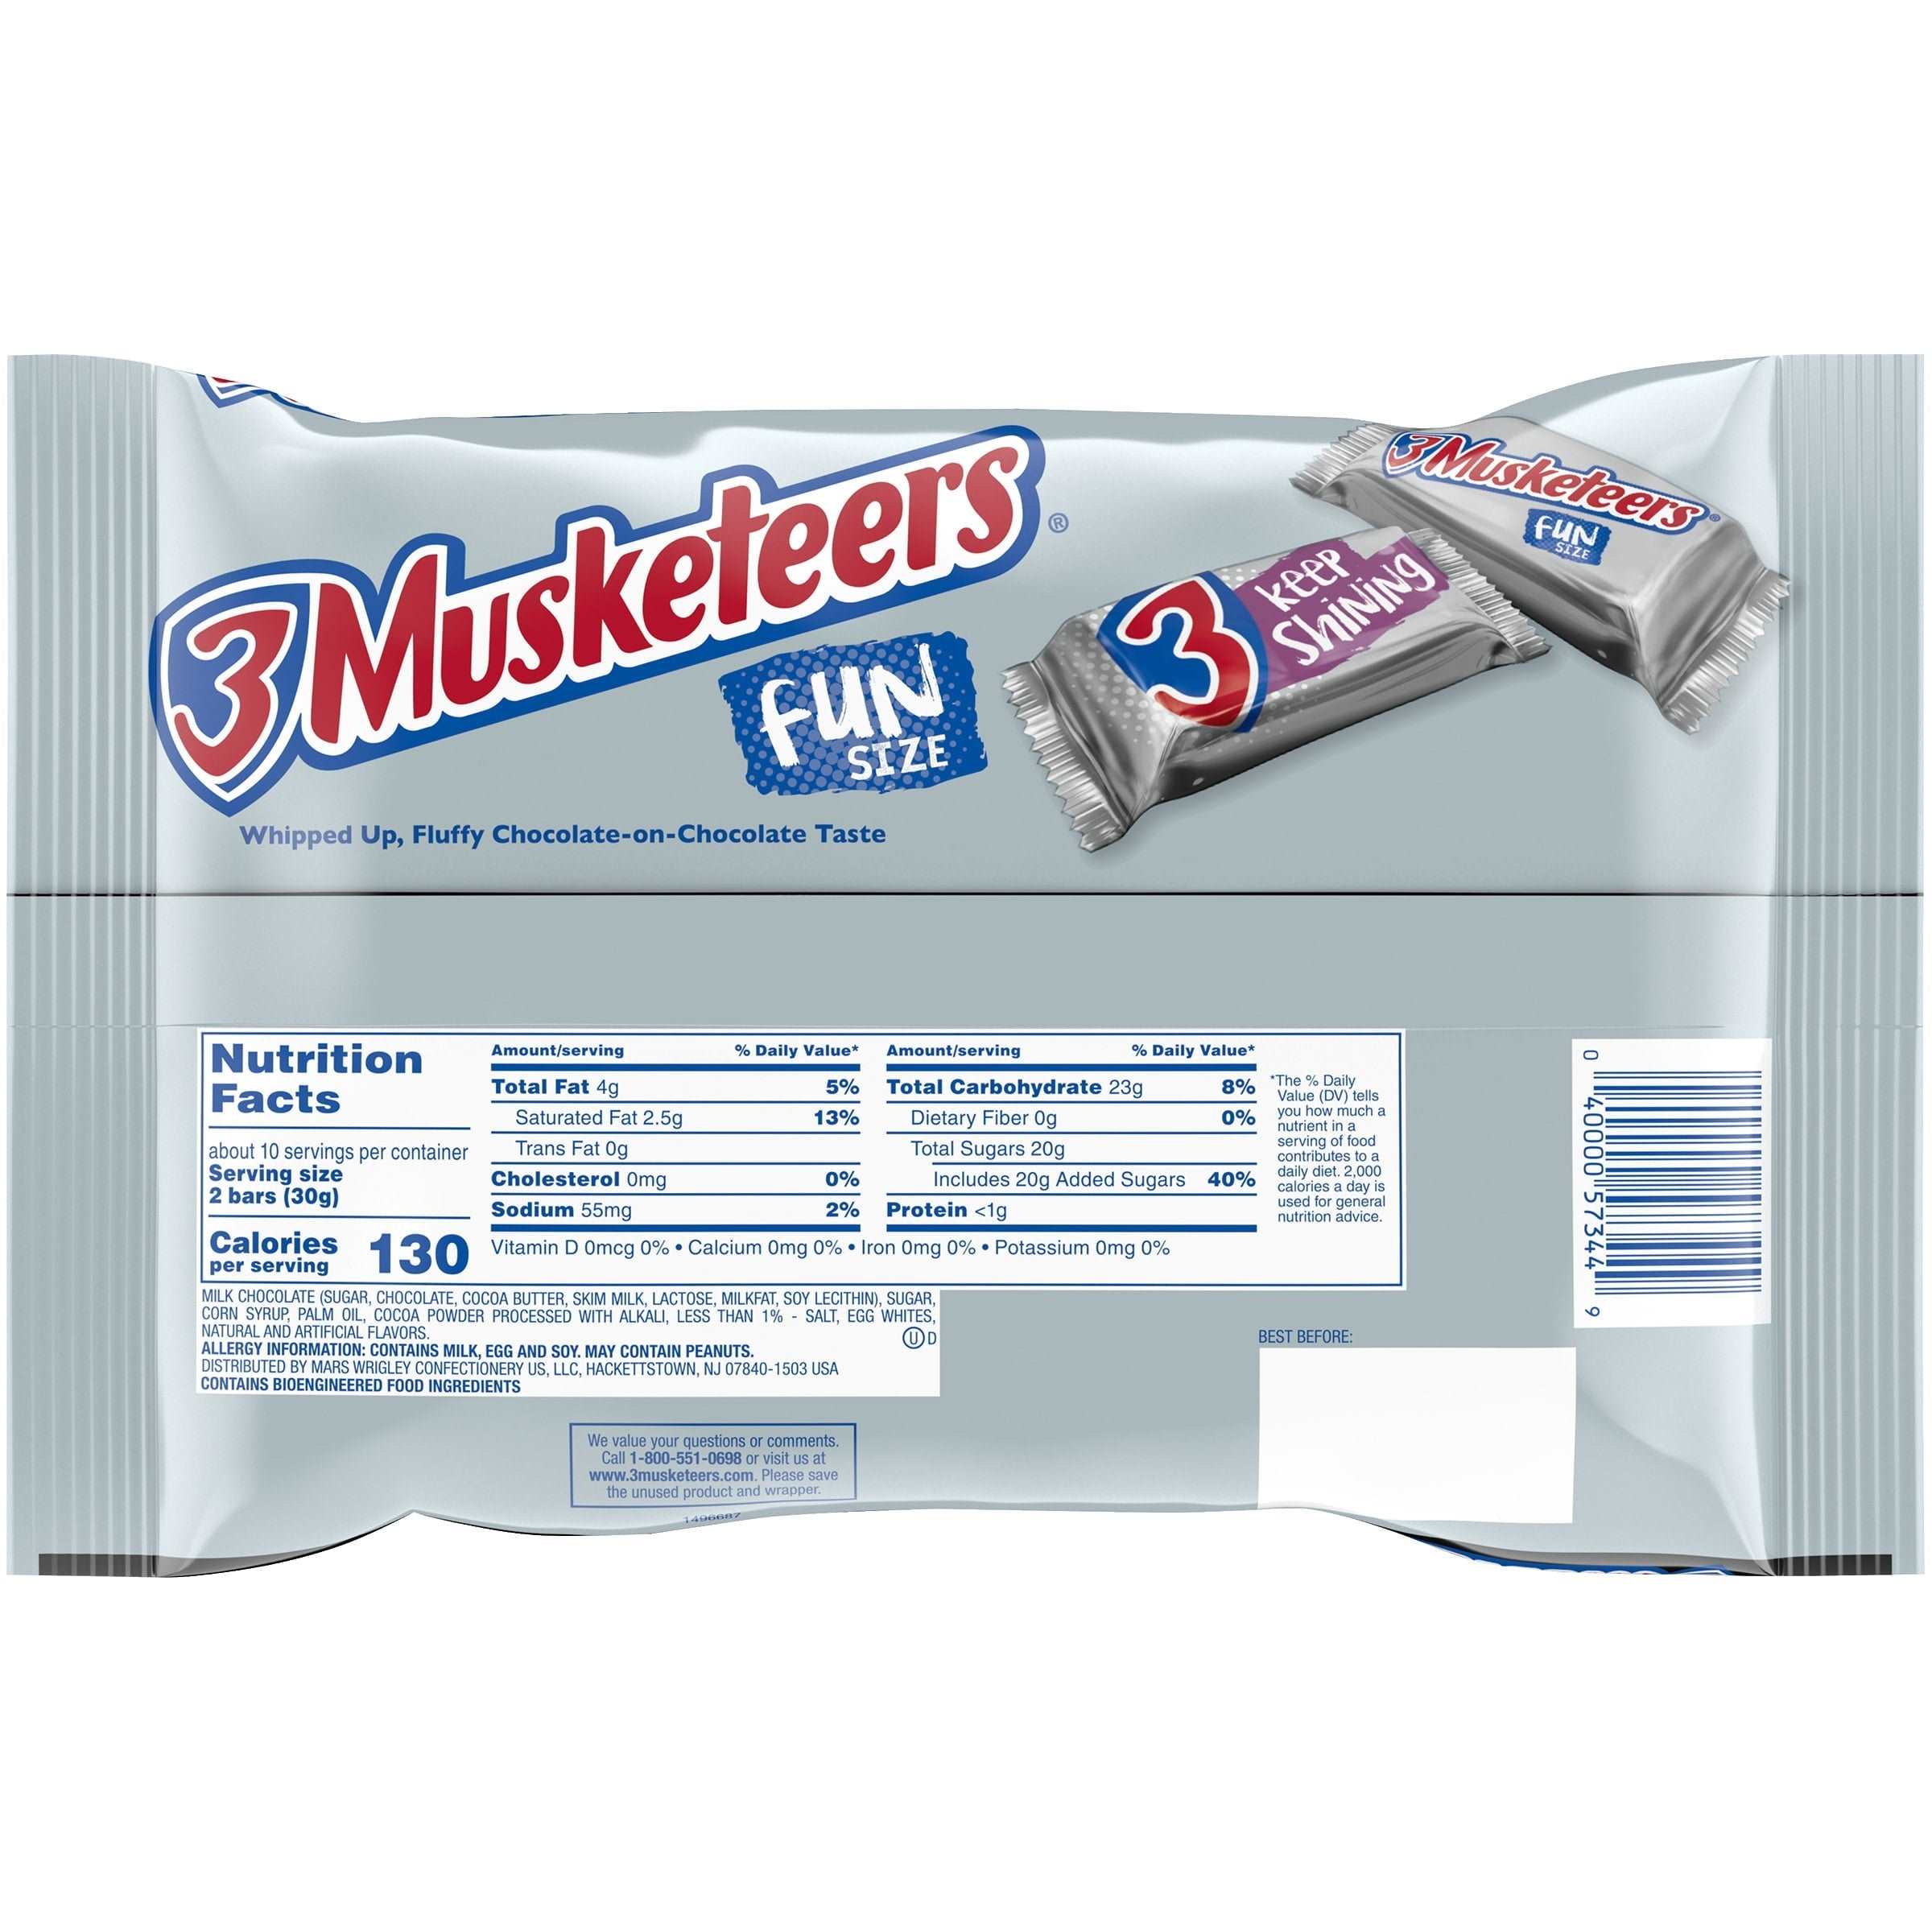 Wholesale prices with free shipping all over United States 3 Musketeers Spooky Halloween Fun Size Chocolate Candy - 10.48 oz Bag - Steven Deals